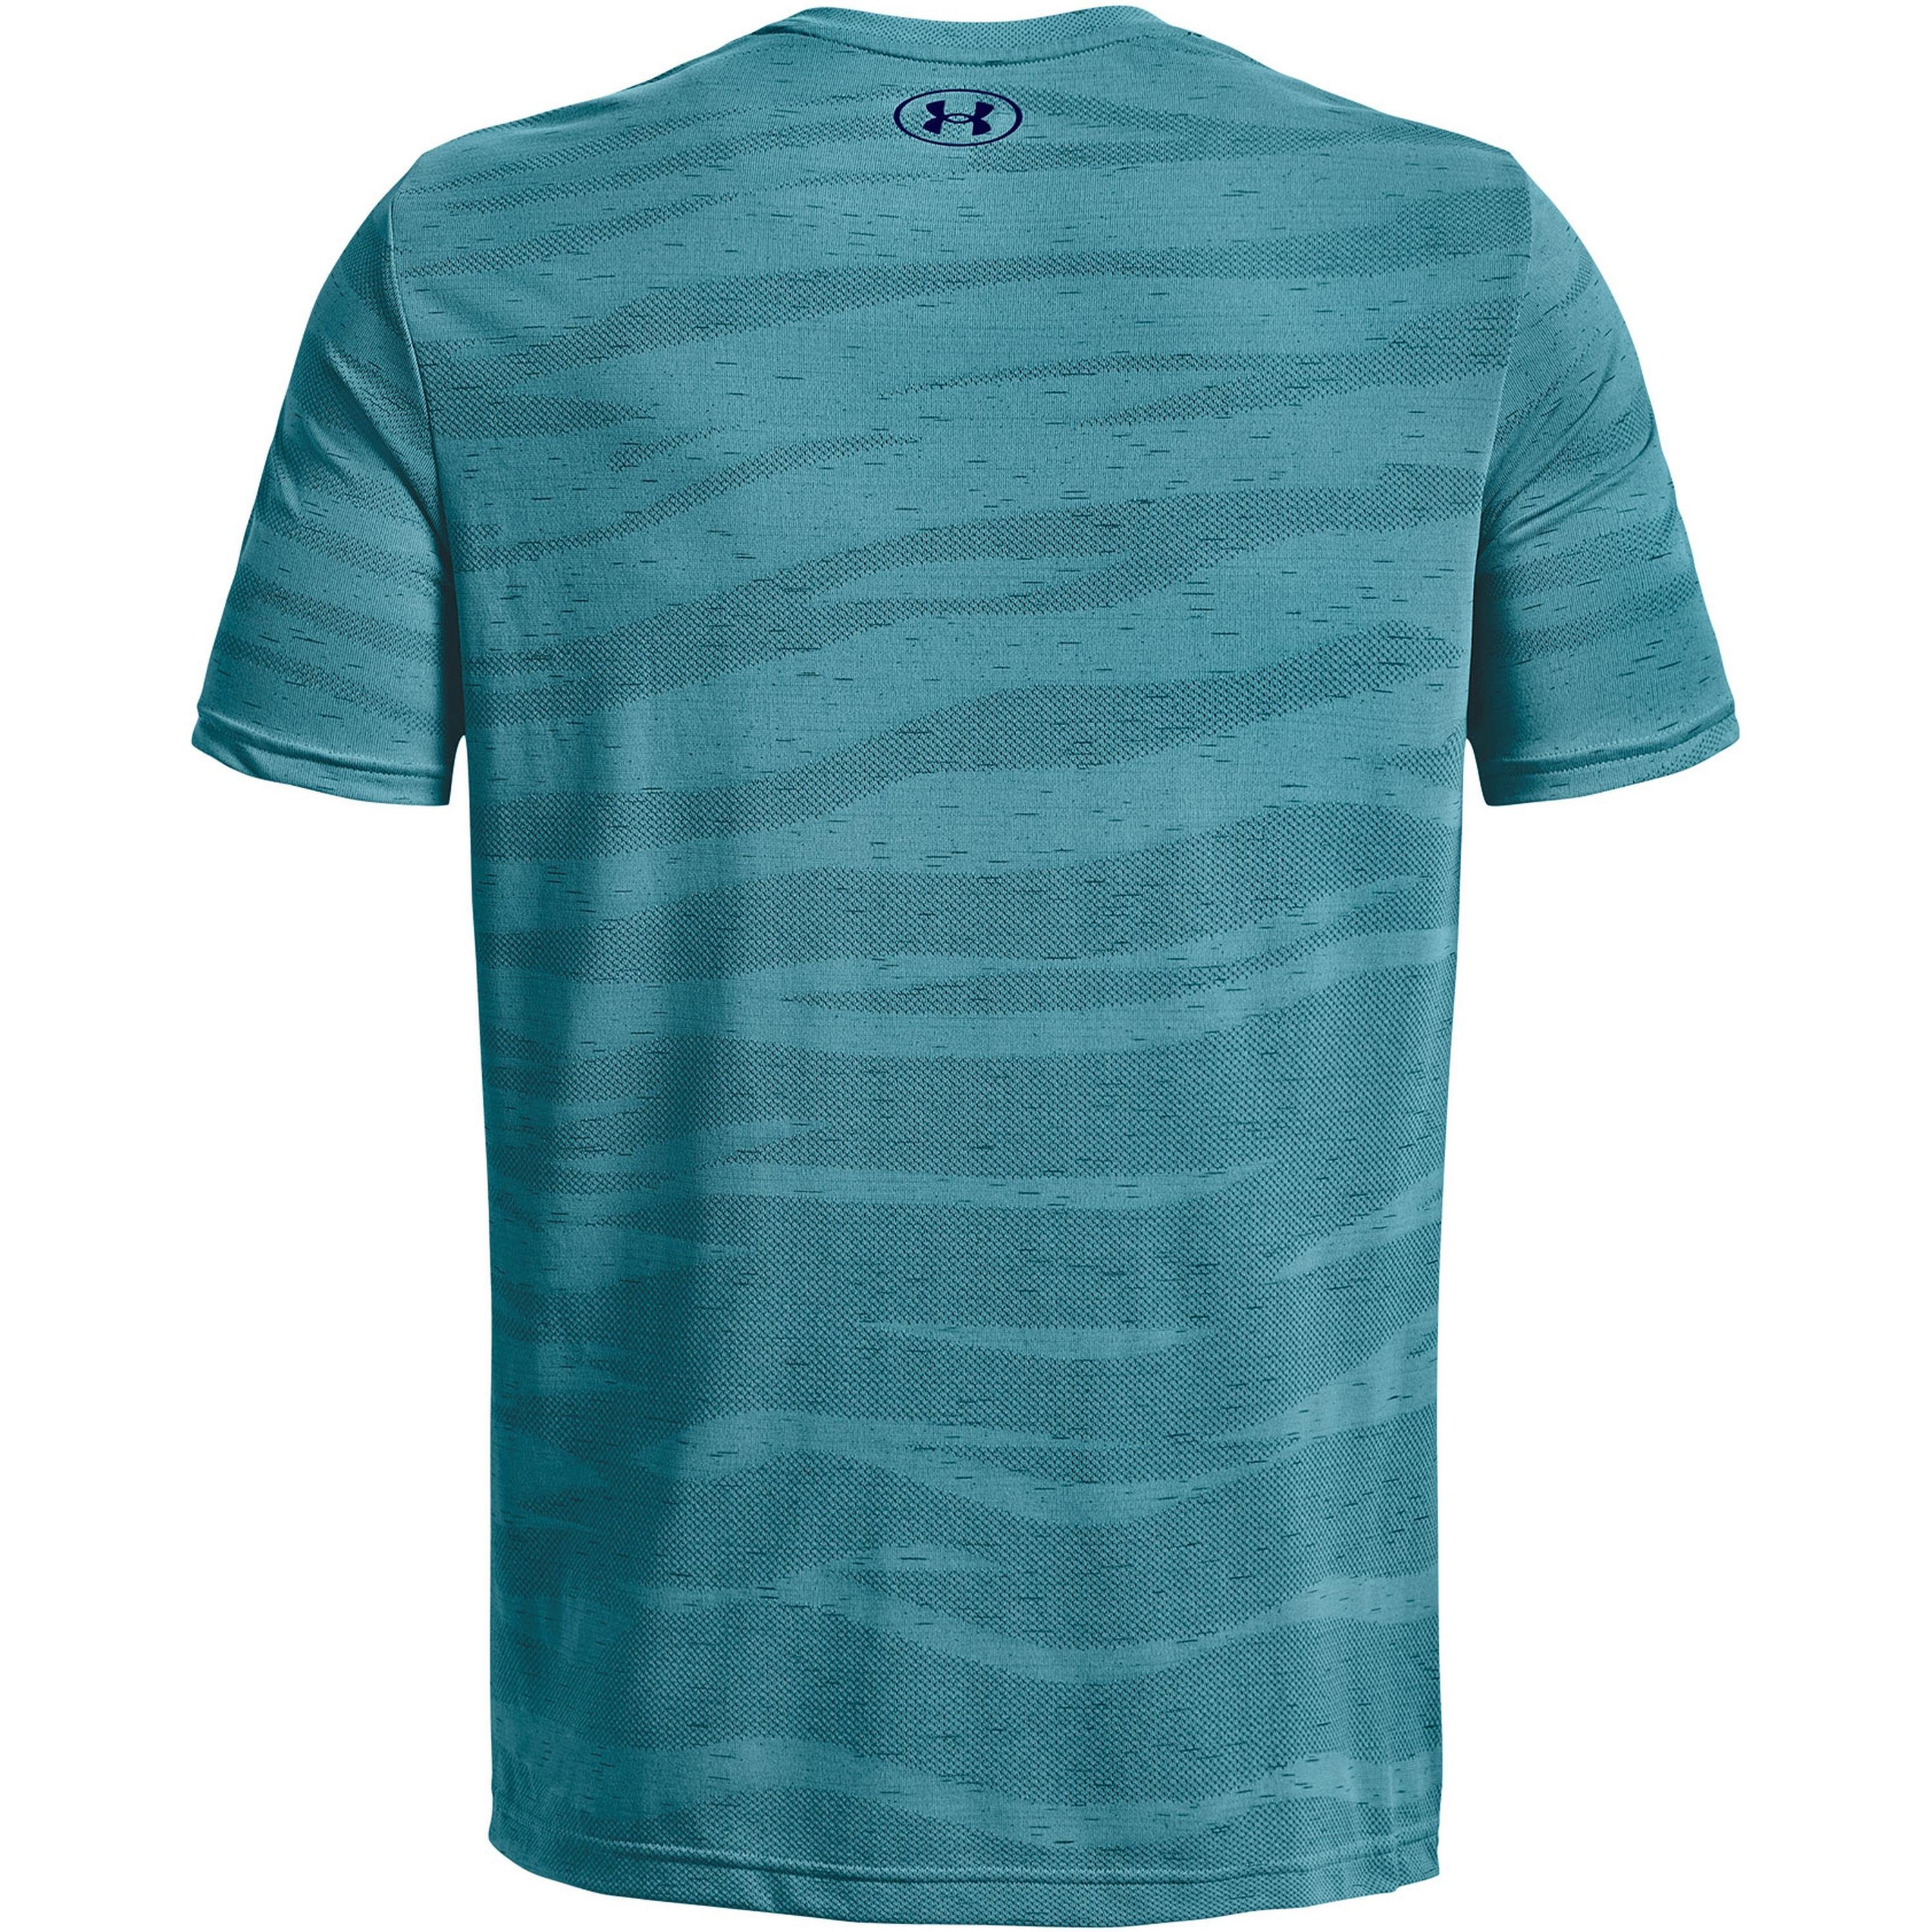 Under Armour® Funktionsshirt Seamless glacierblue-sonarblue